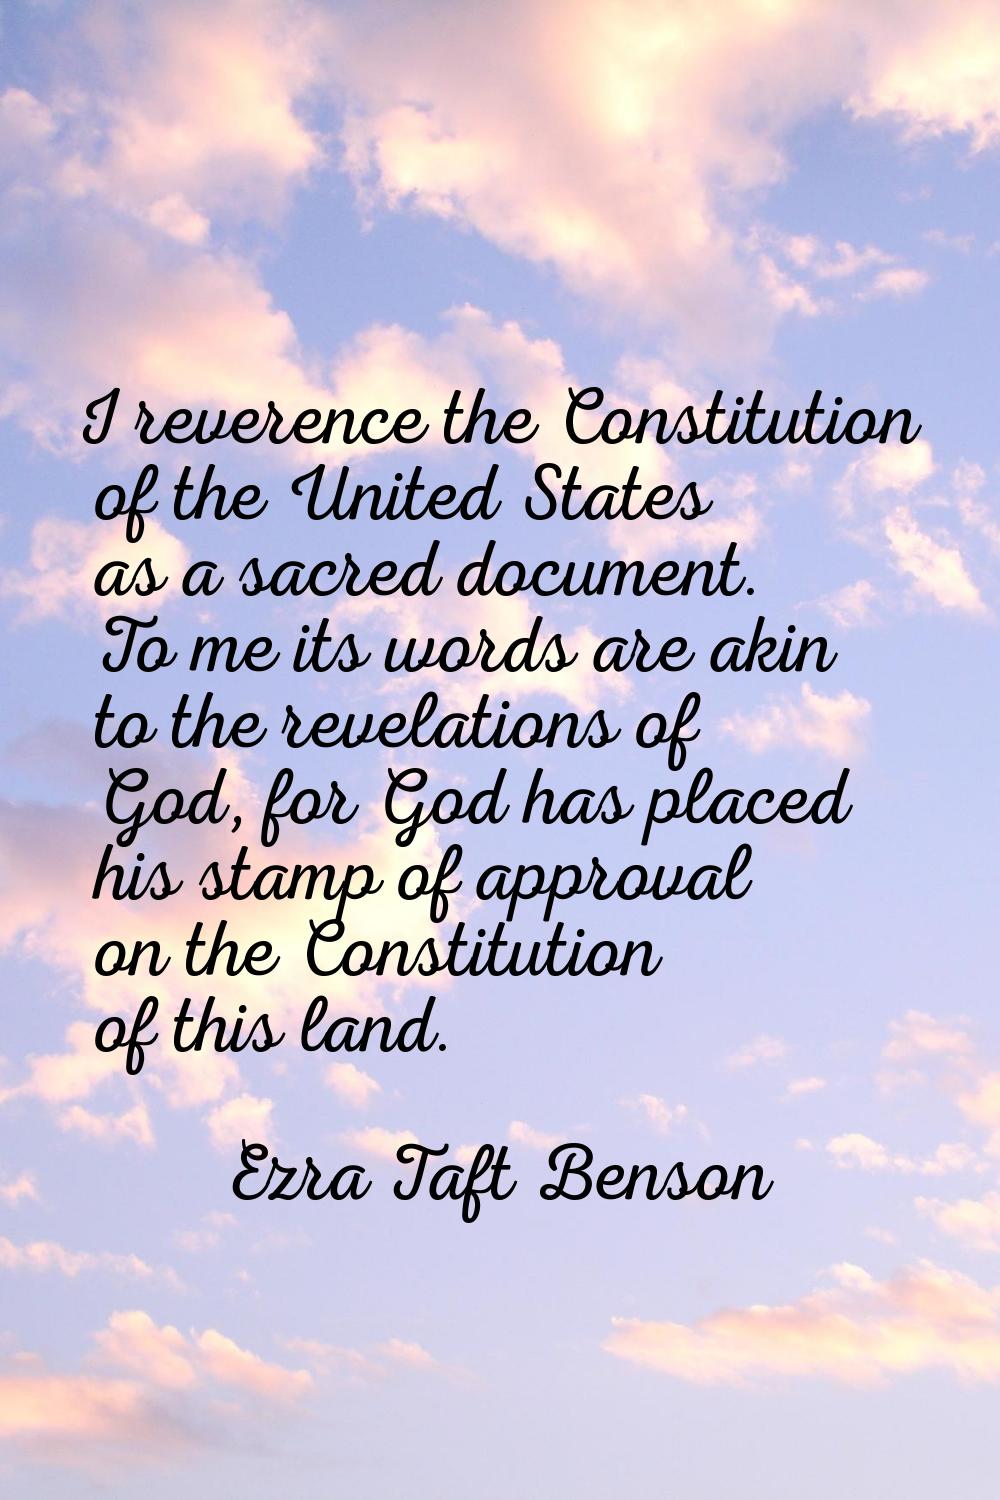 I reverence the Constitution of the United States as a sacred document. To me its words are akin to